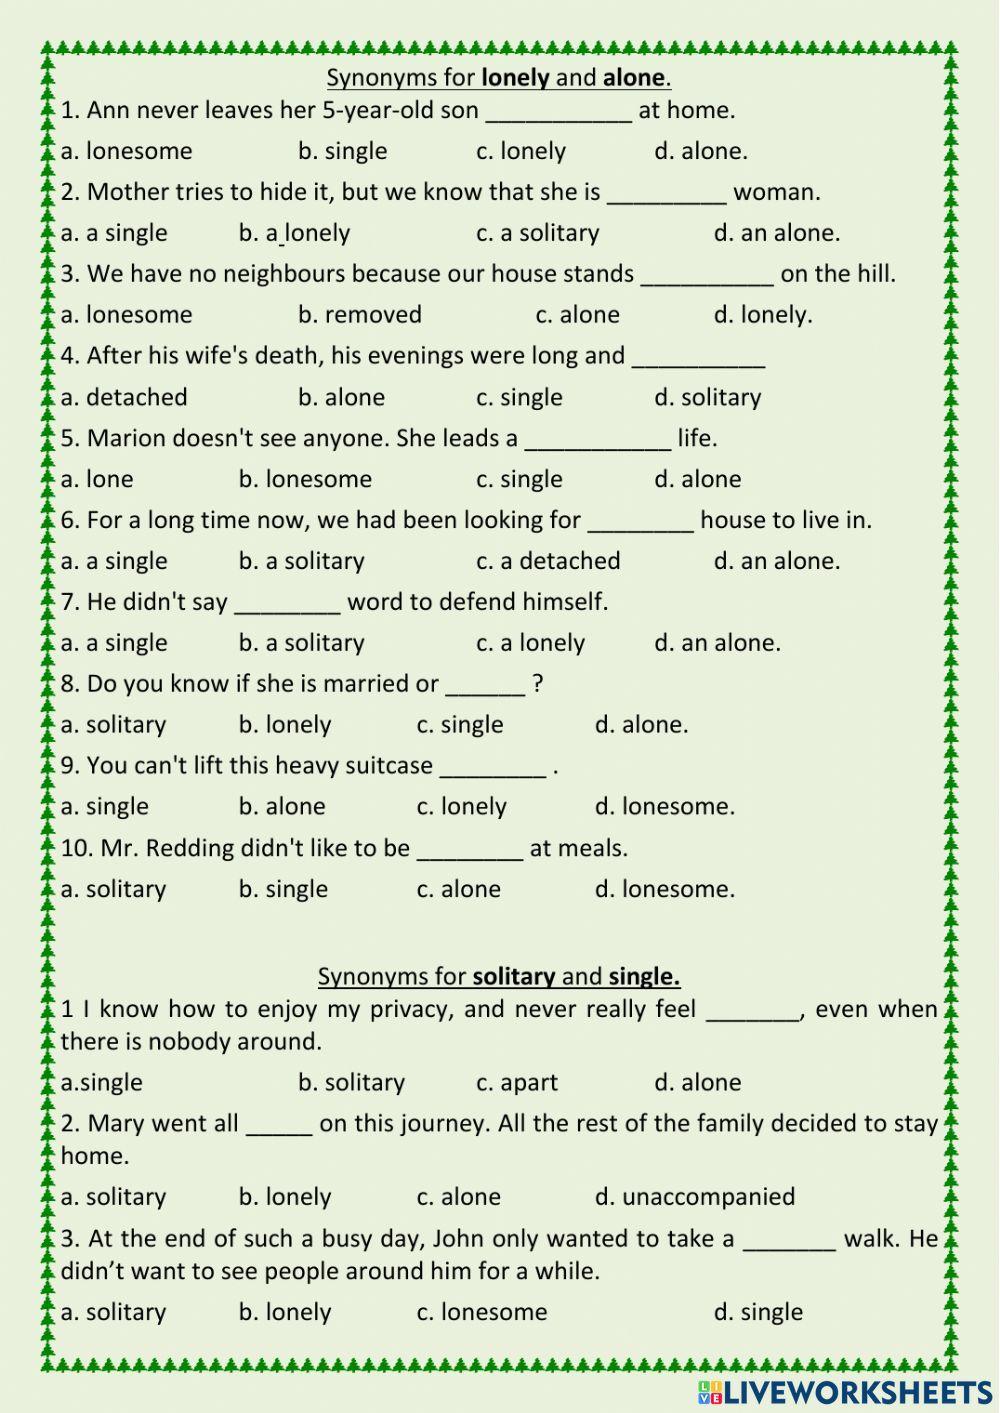 Synonyms lonely, solitary, single, alone worksheet | Live Worksheets